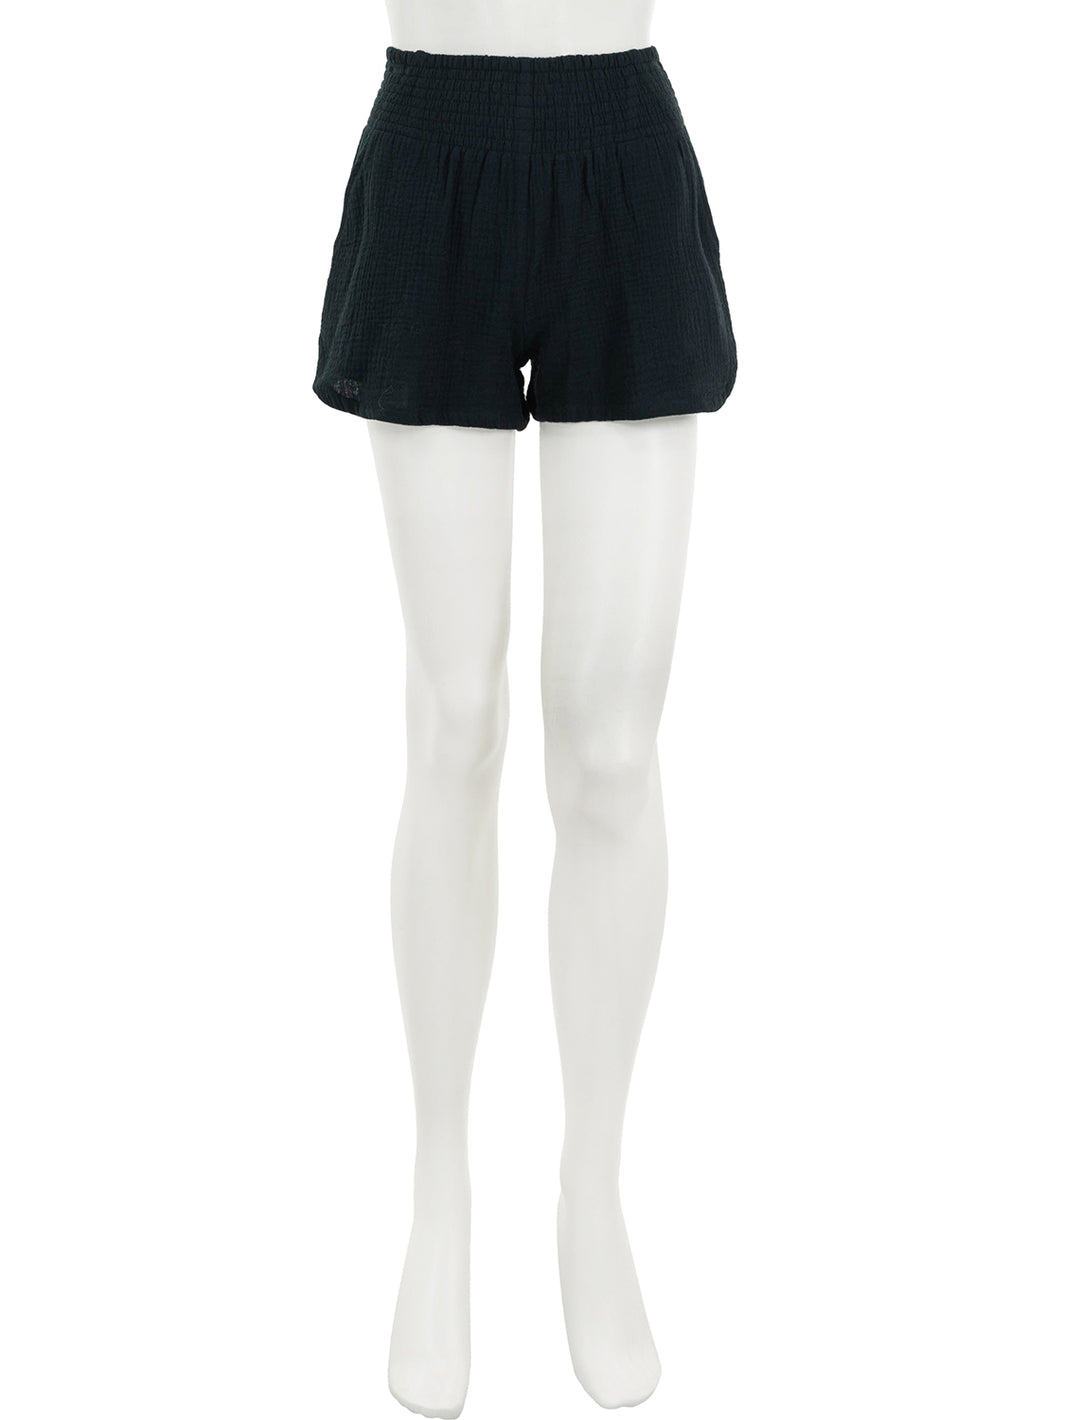 Front view of Marine Layer's corine shorts in black.